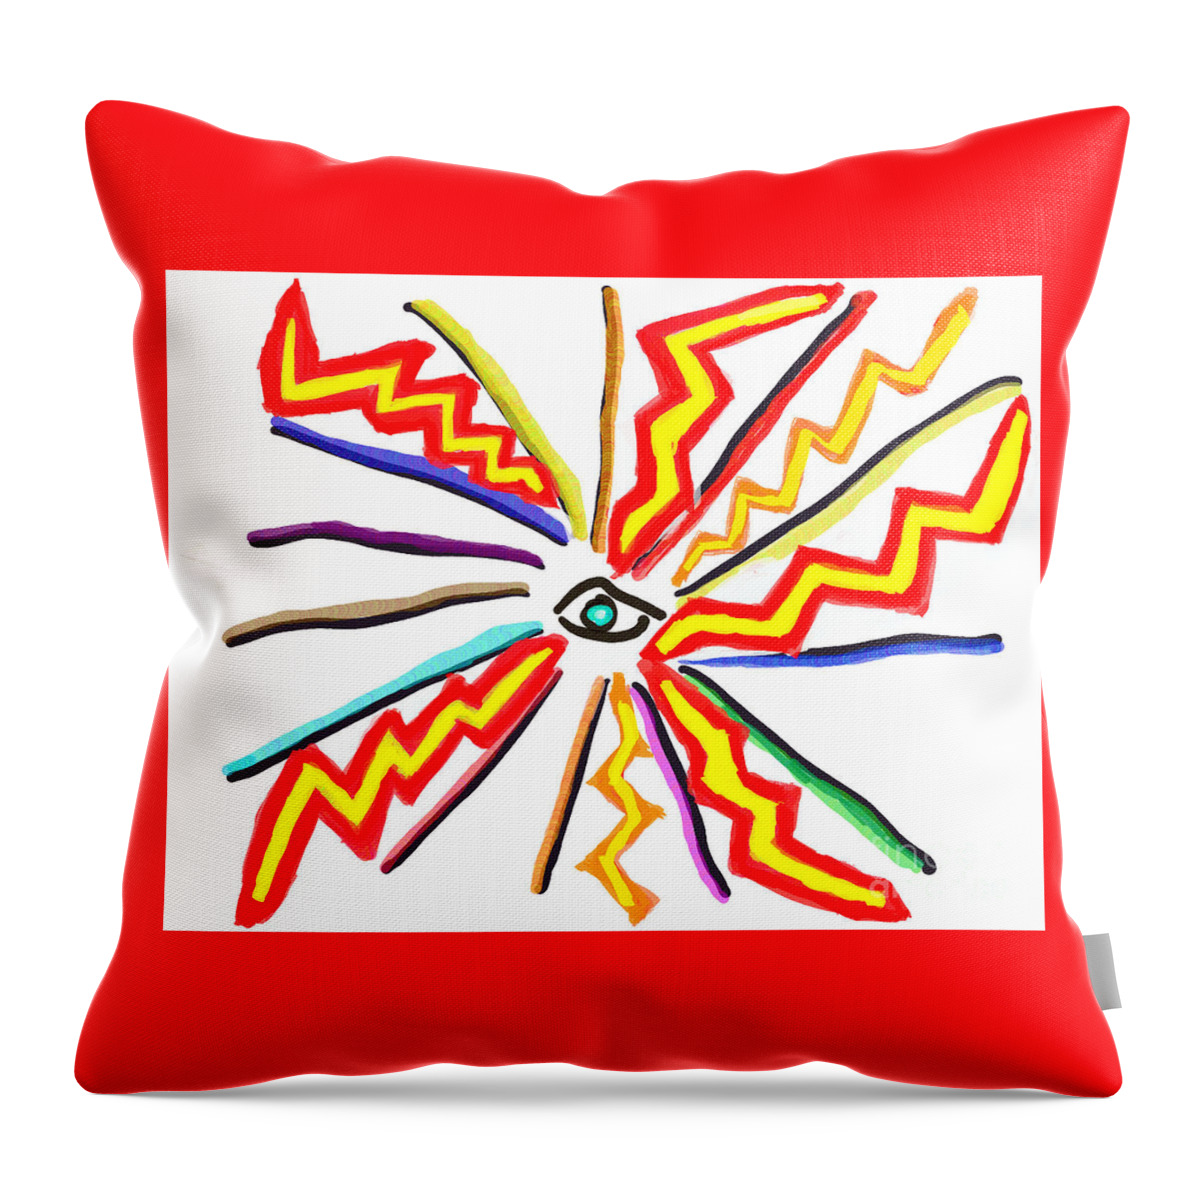 Primitive Impressionistic Expressionism Throw Pillow featuring the digital art Lightning Eye by Zotshee Zotshee